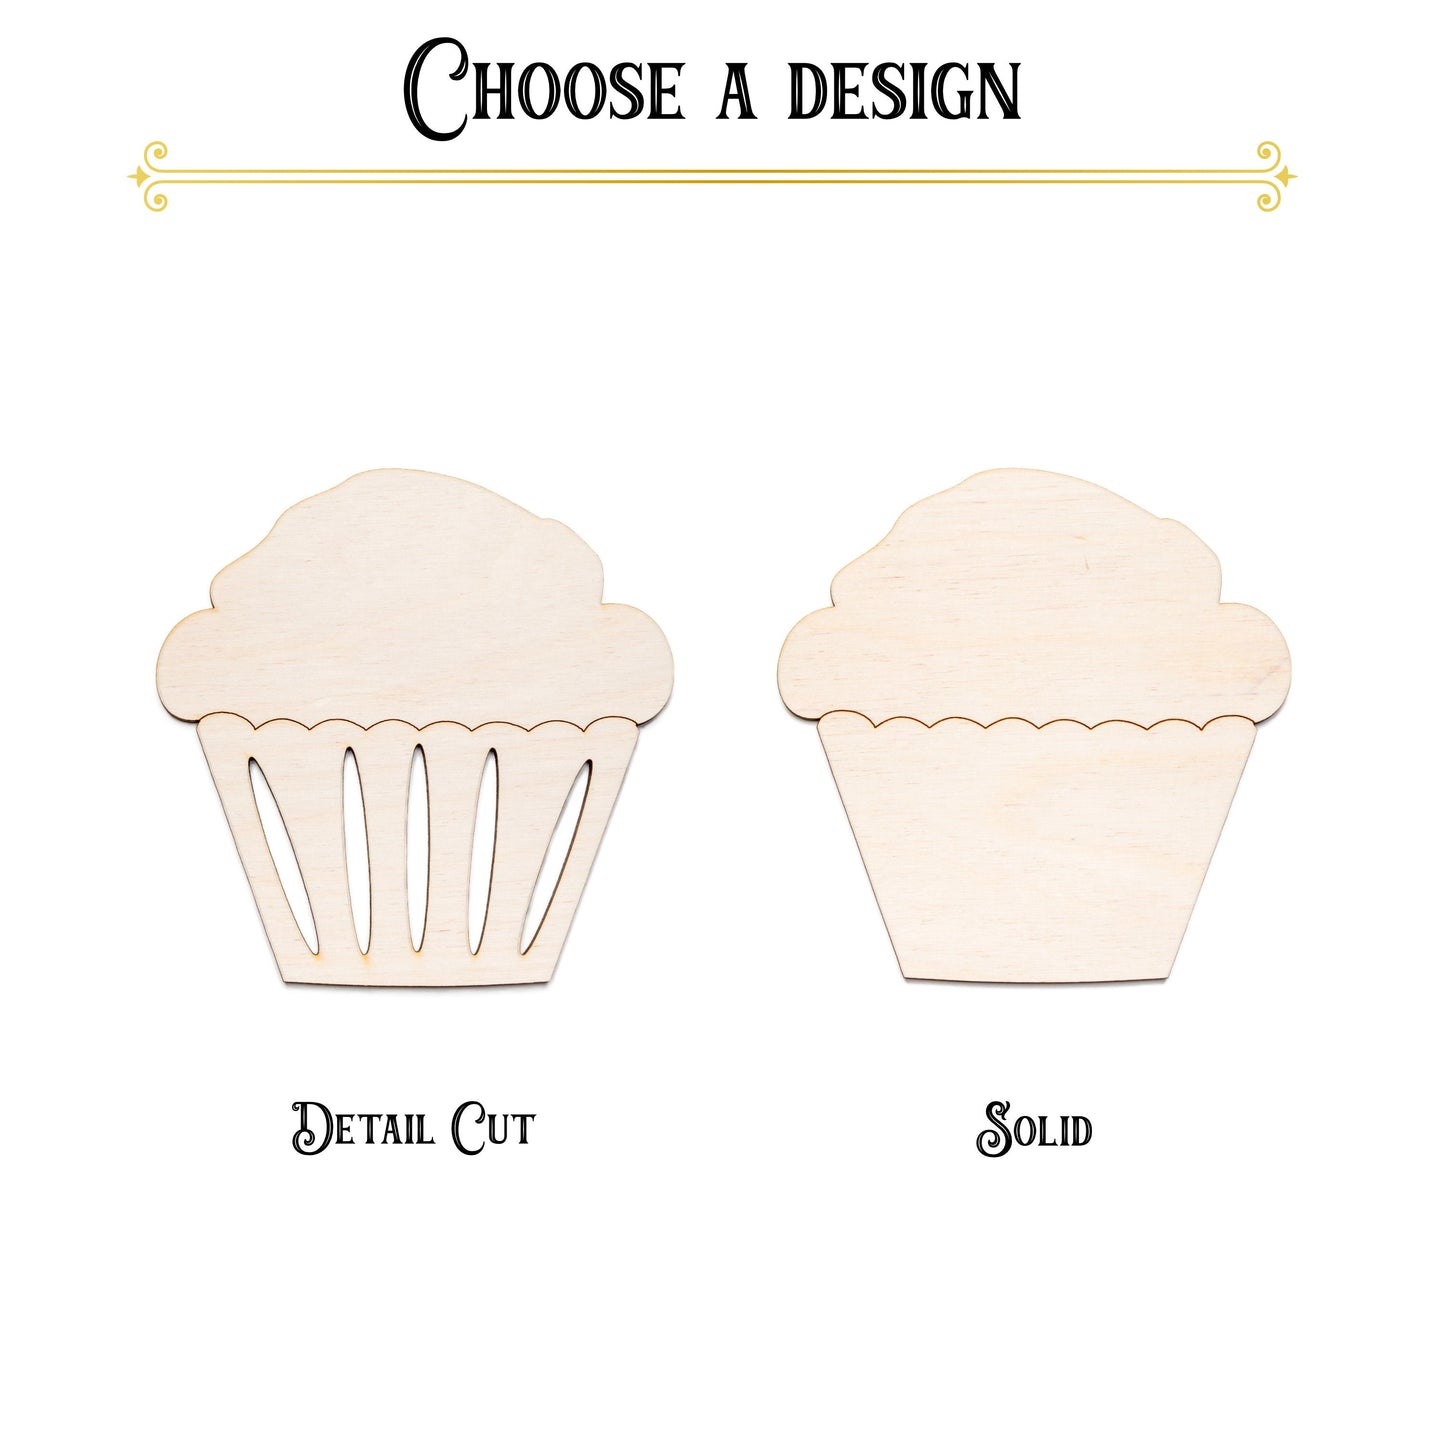 Muffin-Detail Wood Cutout-Two Design Options-Bakery Theme Decor-Muffins And Cupcakes-Various Sizes-DIY Crafts-Sweets And Desserts Theme Cuts